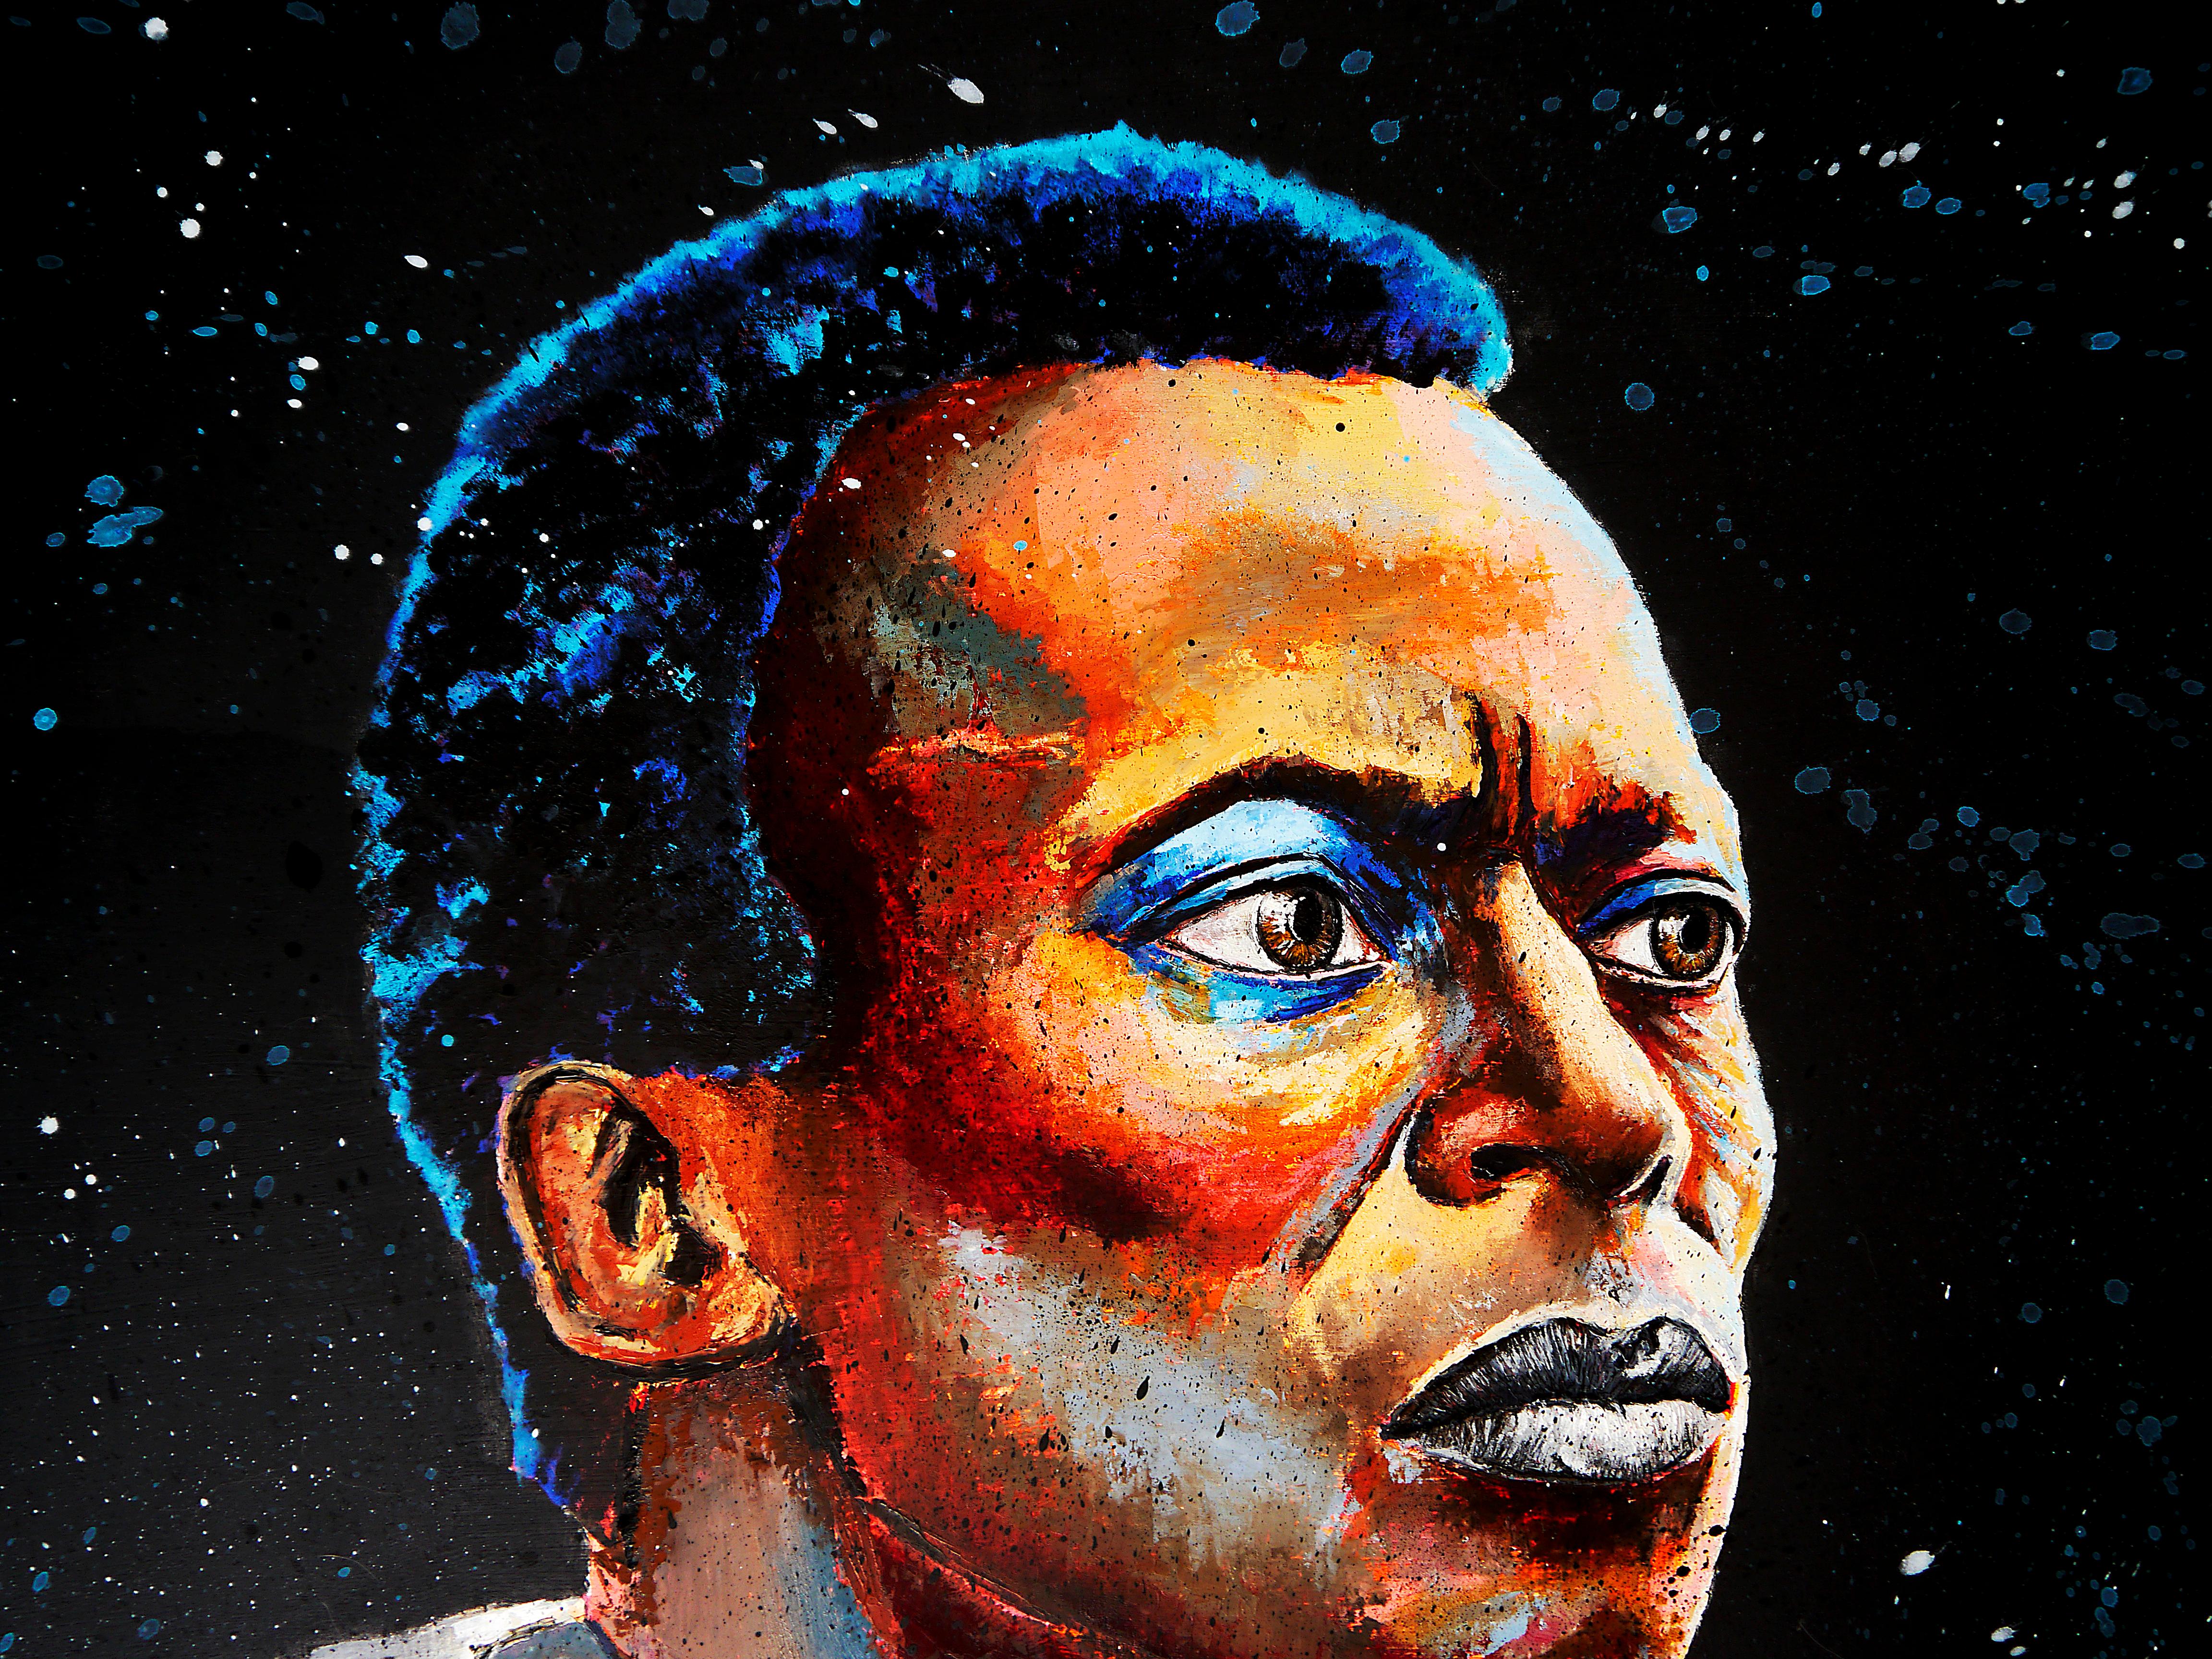 Portrait Miles Davis

Miles Davis icon portrait.

Technique: Acrylics, oil painting, China ink on canvas 73x60cm /28,7x23,6in

》》R E A D Y -- T O -- H A N G《《

❶ → Original signed work. Certificate of authenticity included.

❷ → Protection for